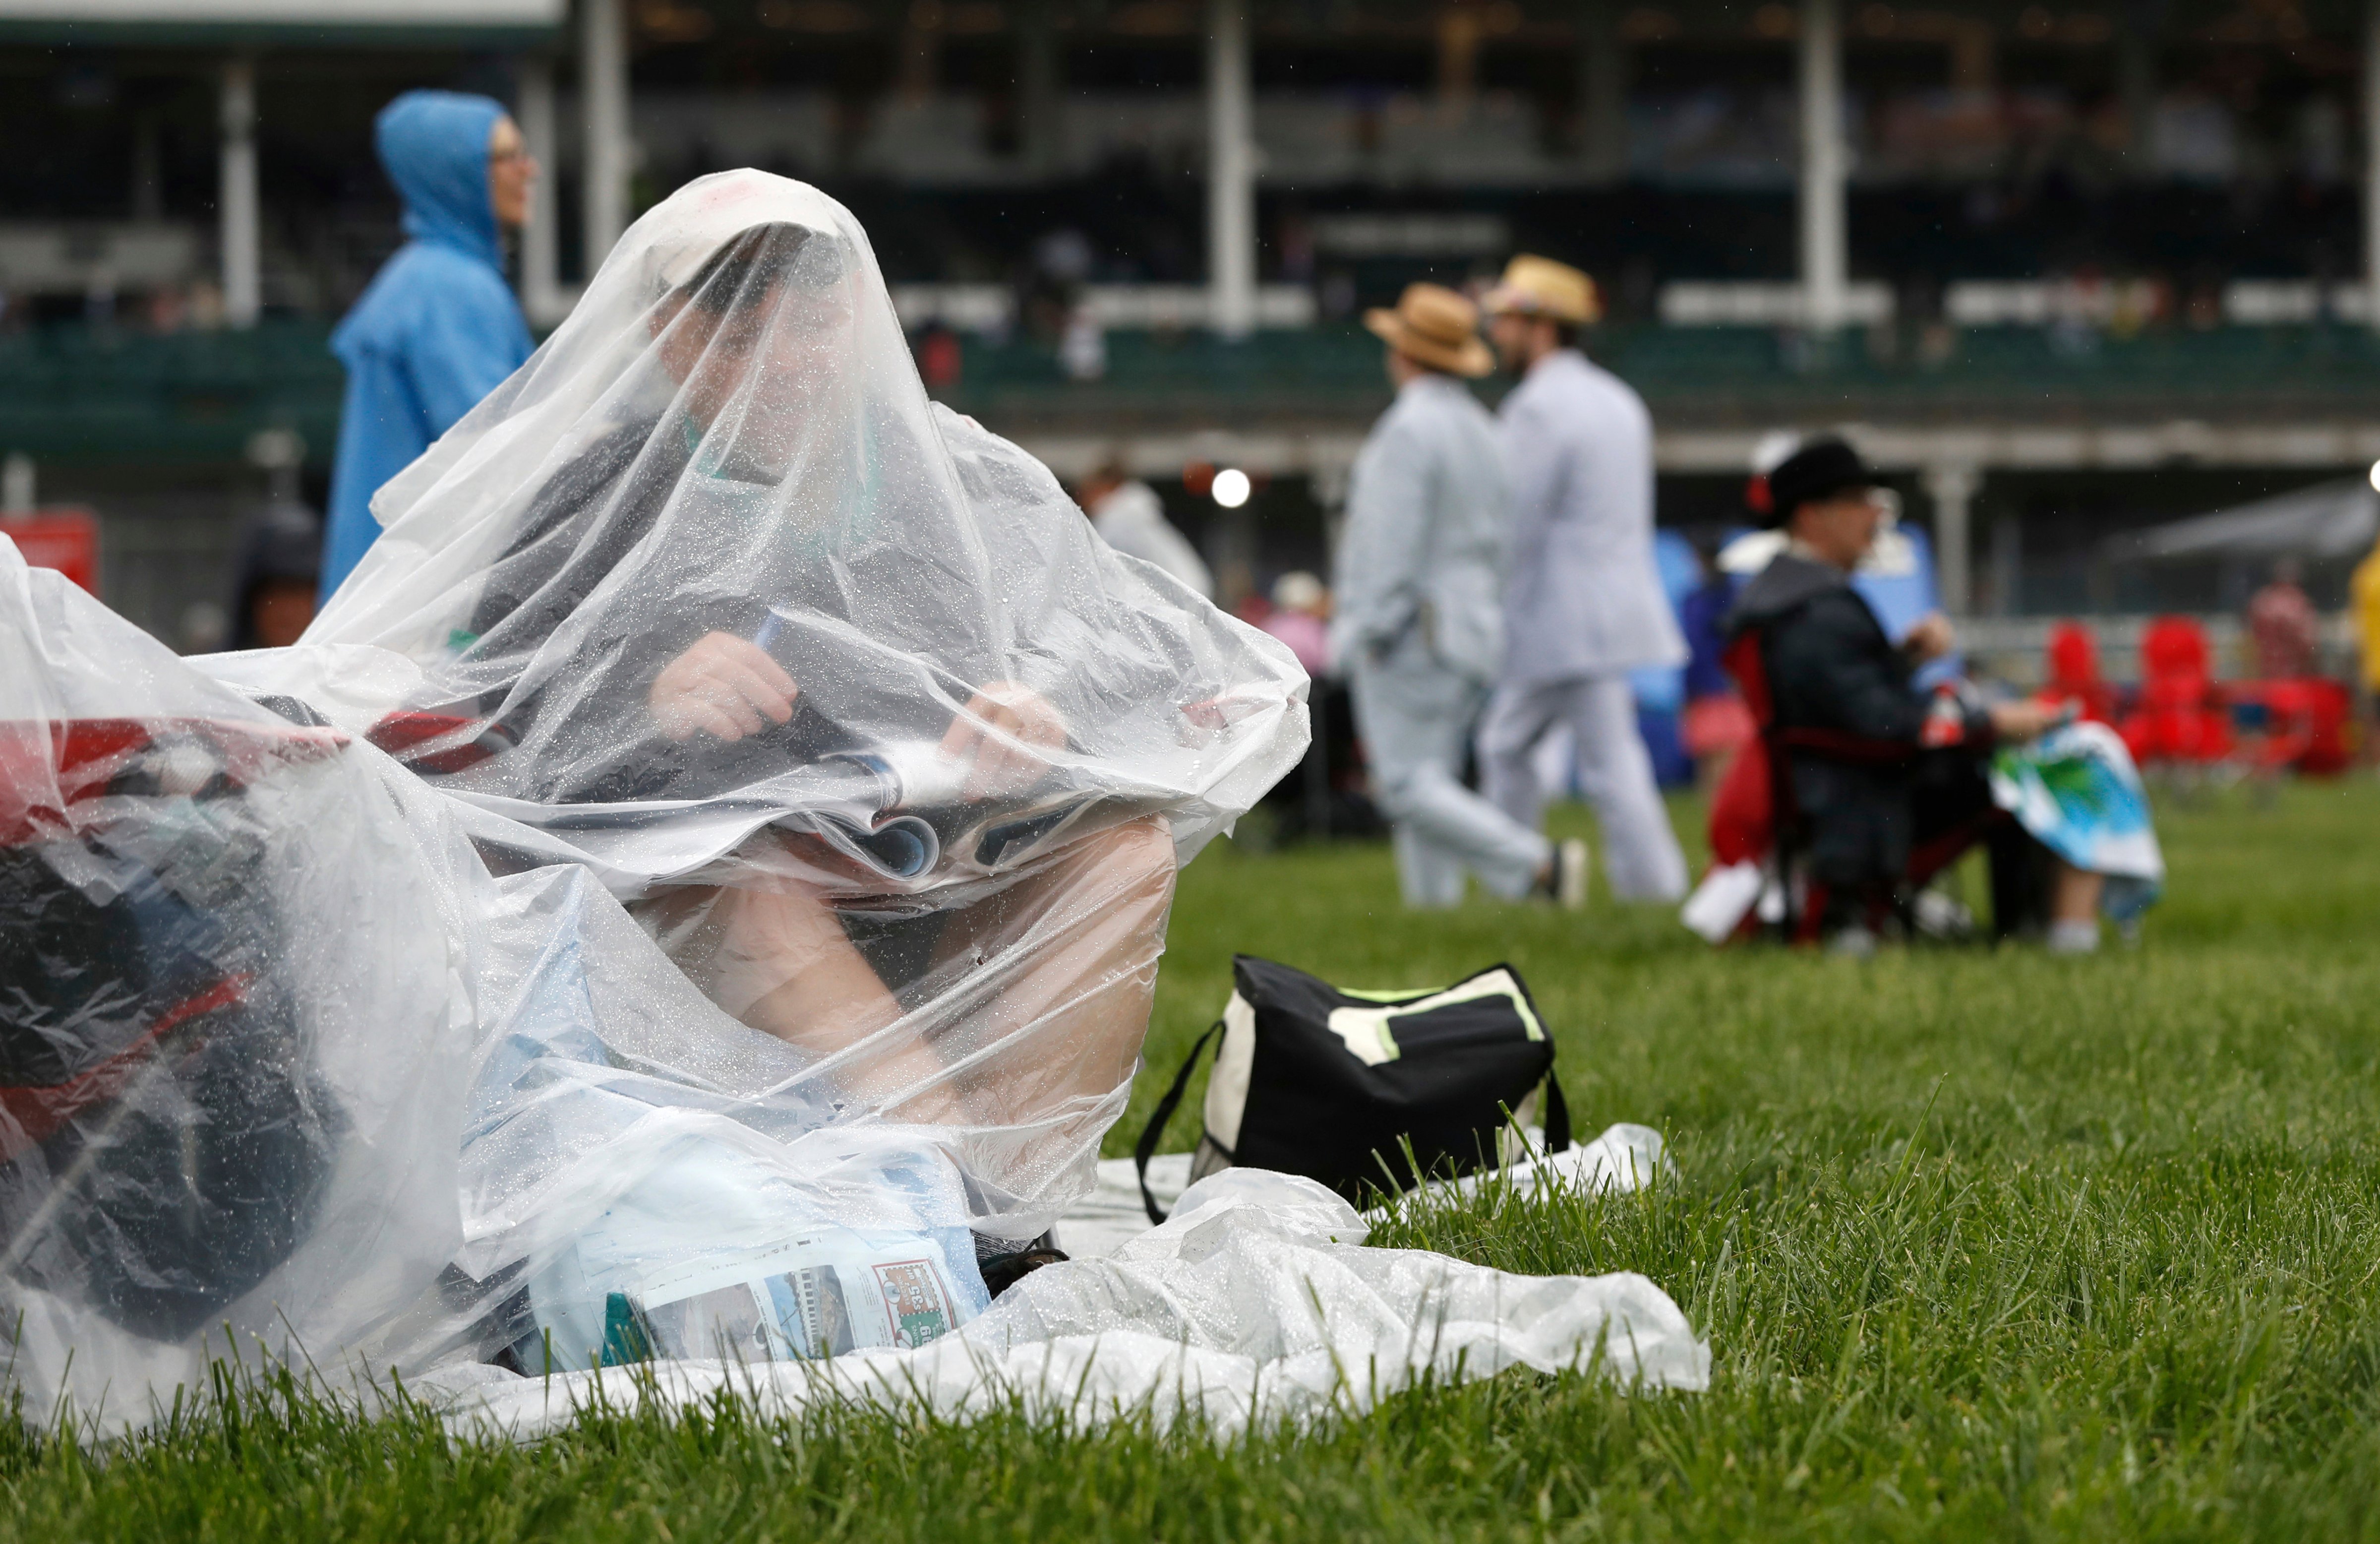 Curt Schuman of Louisville looks at a program before the 144th running of the Kentucky Derby horse race at Churchill Downs, in Louisville, Ky on May 5, 2018 (John Minchillo—AP/REX/Shutterstock)